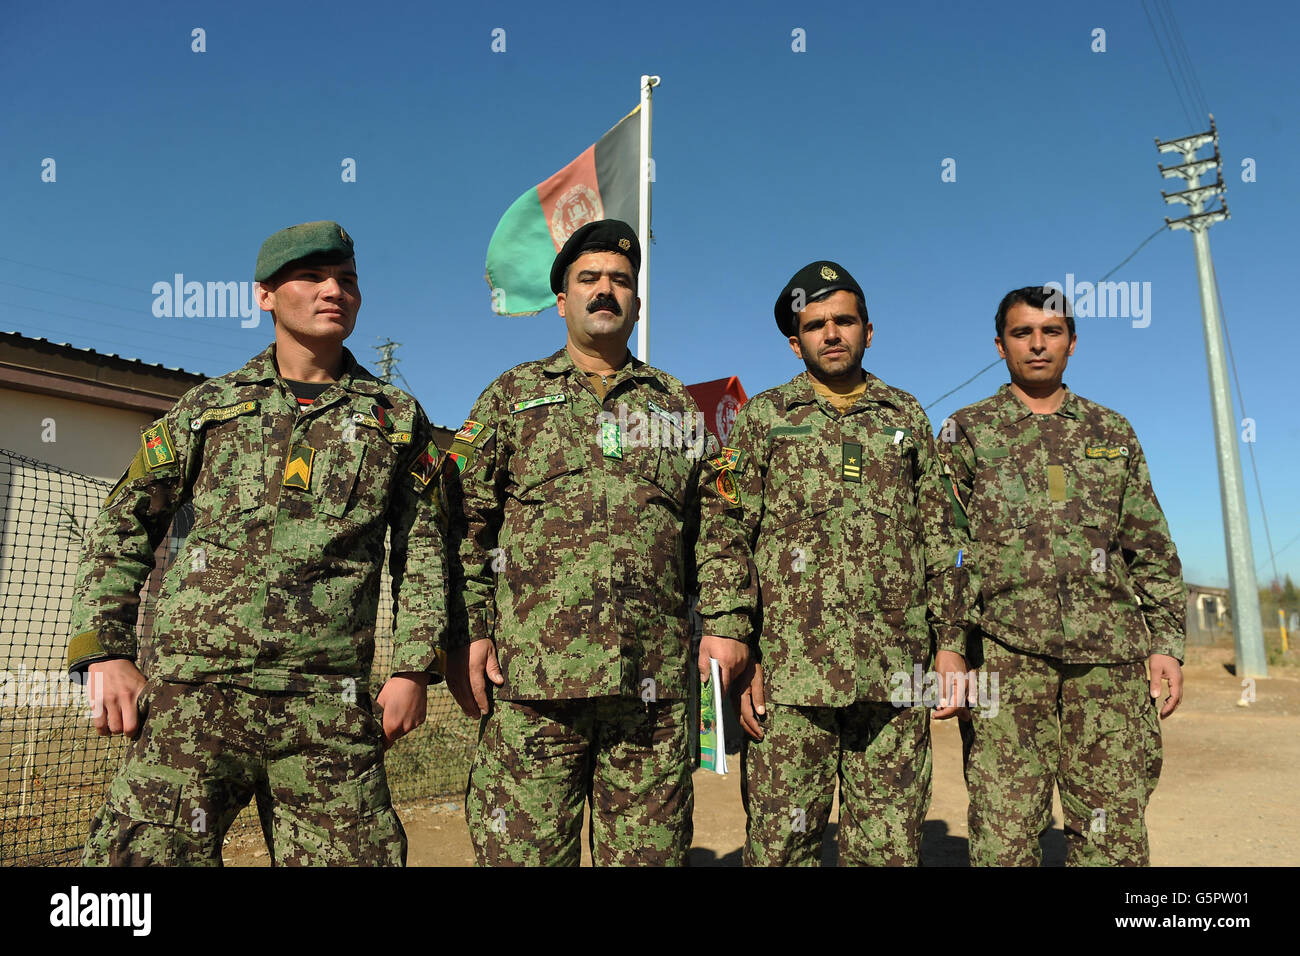 (left to right) Counter insurgency officers Sergeant Baryalai, Lieutenant Colonel Mohammad Nasim, Captain Framoos and Sergeant Karwan of the Afghan National Army after handing out certificates at a mortar course graduation at Shorobak training centre, Helmand Province, Afghanistan. Stock Photo